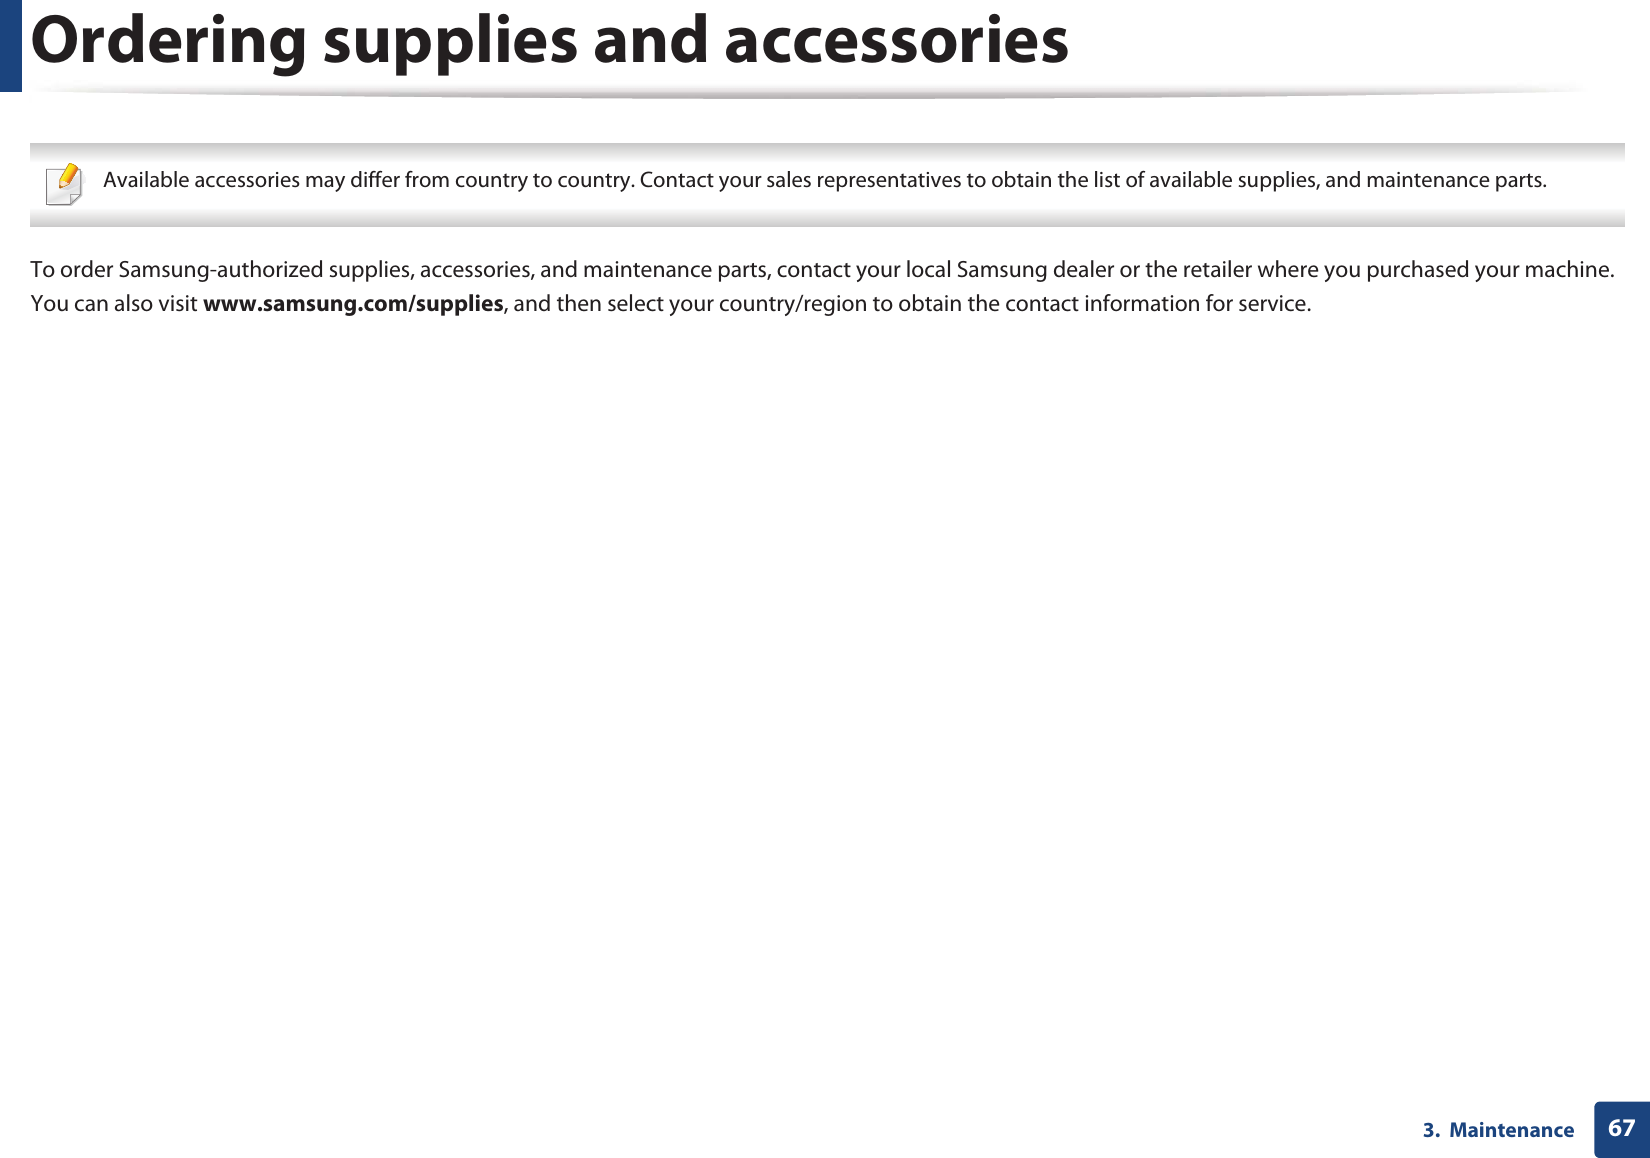 673.  MaintenanceOrdering supplies and accessories Available accessories may differ from country to country. Contact your sales representatives to obtain the list of available supplies, and maintenance parts. To order Samsung-authorized supplies, accessories, and maintenance parts, contact your local Samsung dealer or the retailer where you purchased your machine. You can also visit www.samsung.com/supplies, and then select your country/region to obtain the contact information for service.